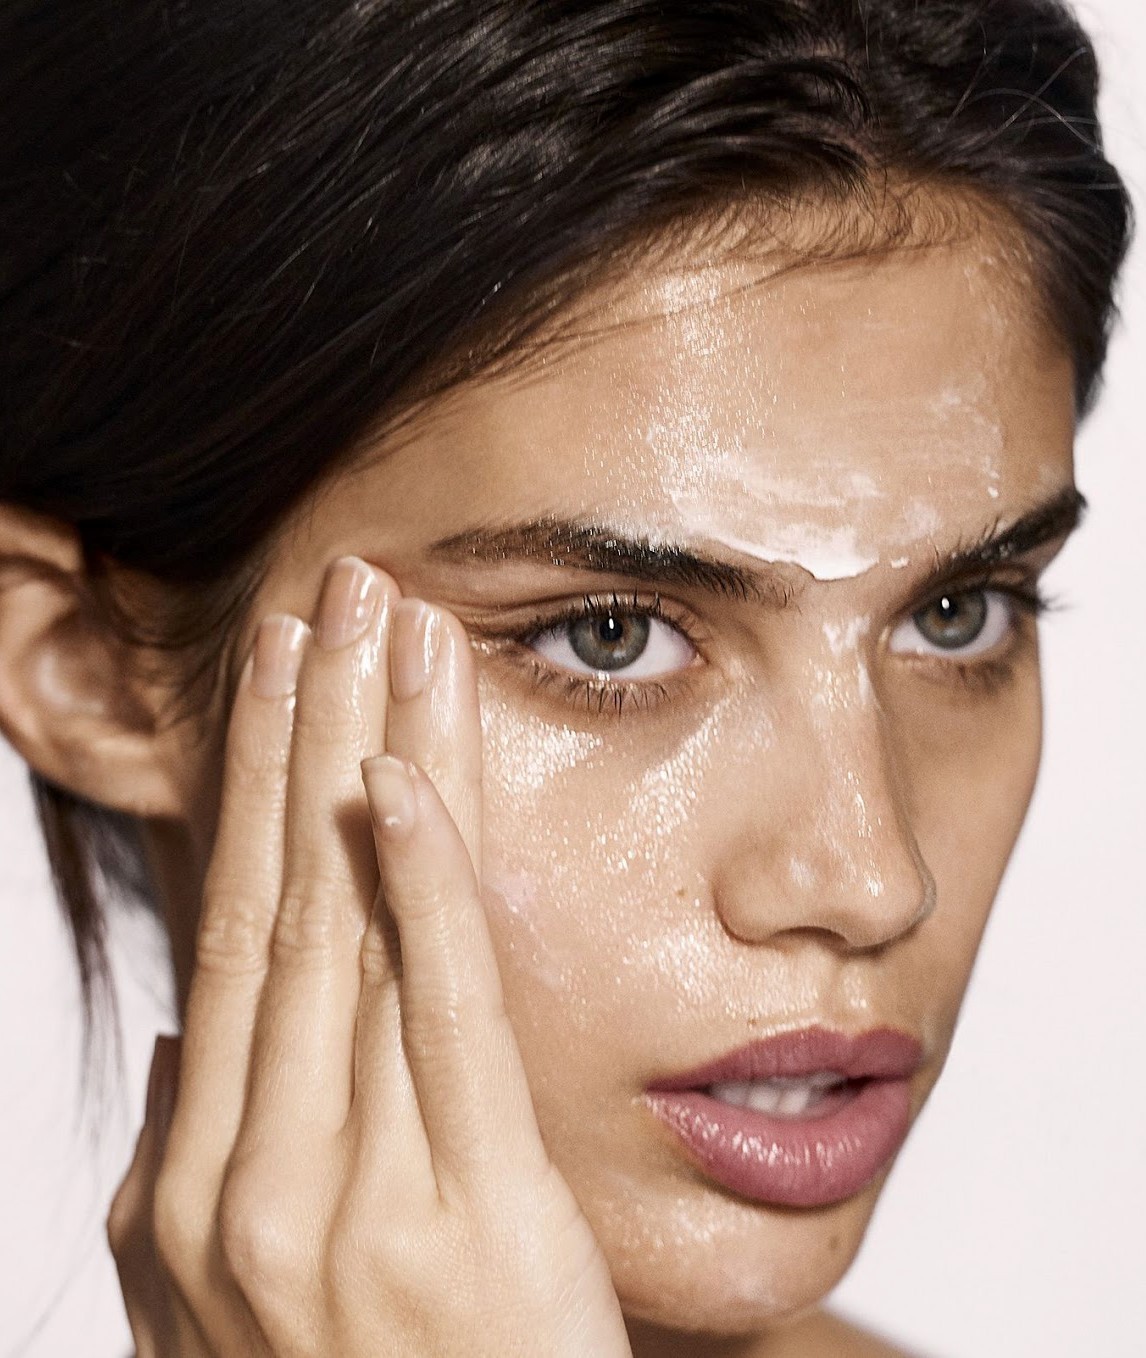 midnight-charm: “Skin in the Game” Sara Sampaio photographed by Carter Smith